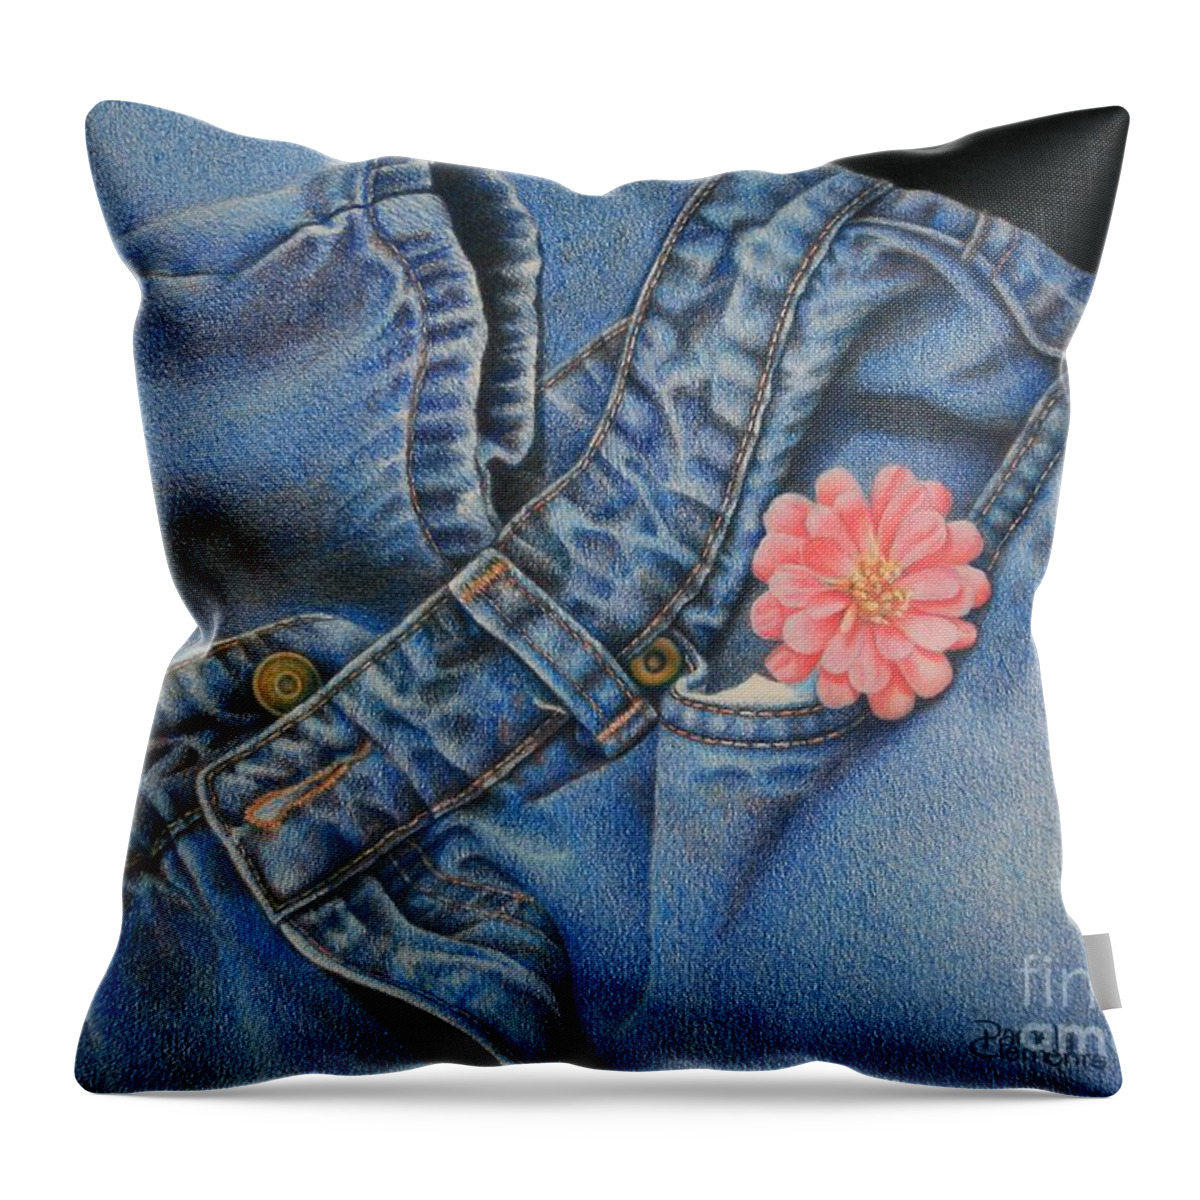 Drawings Throw Pillow featuring the drawing Favorite Jeans by Pamela Clements